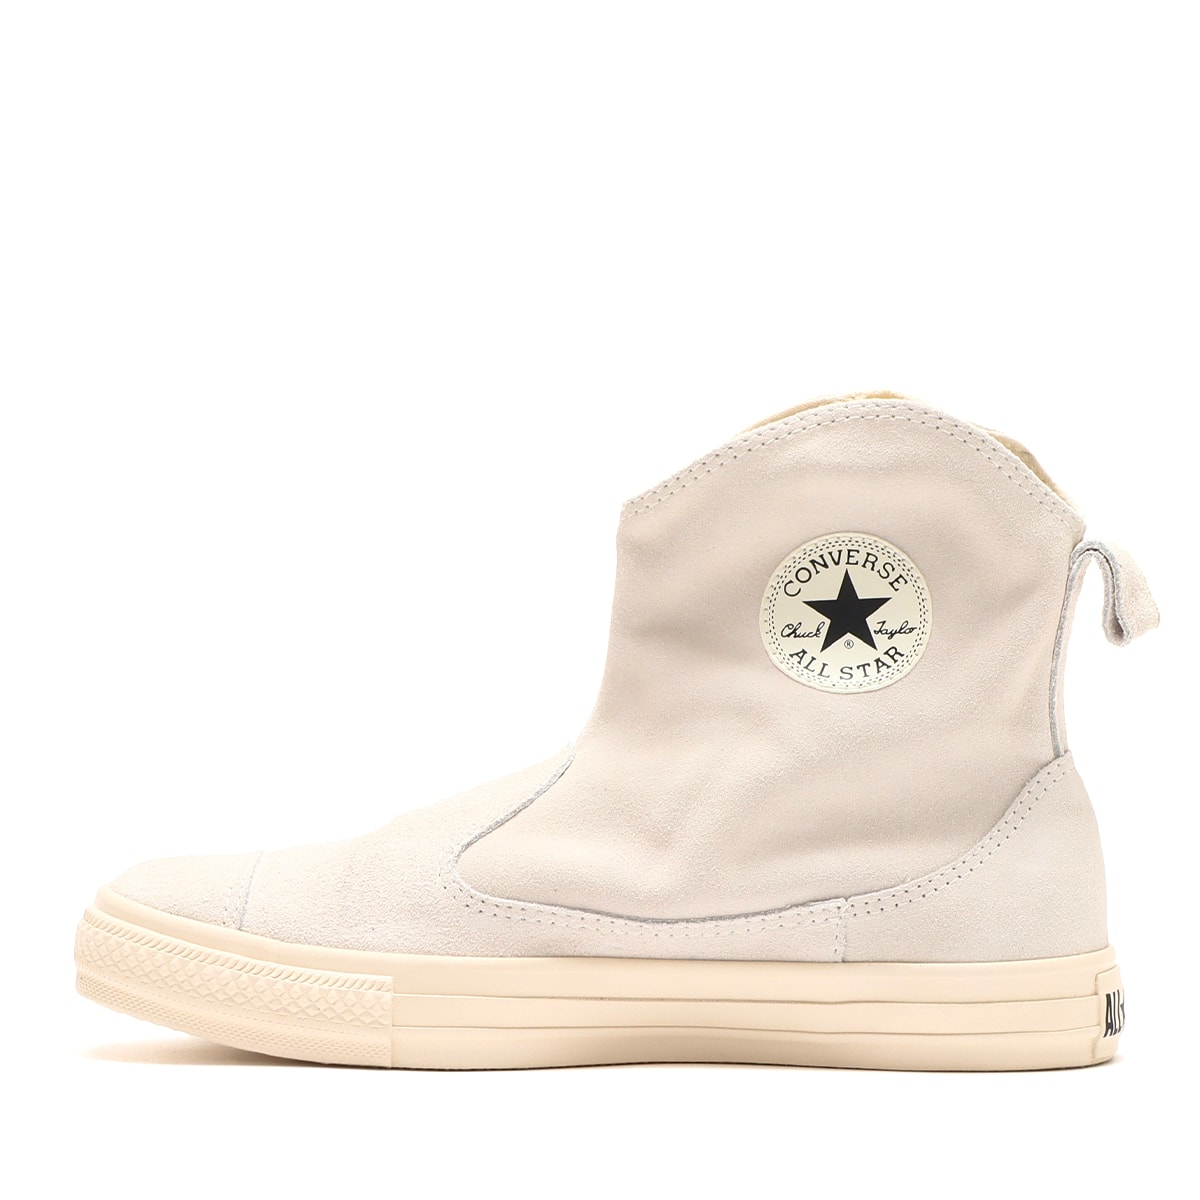 CONVERSE SUEDE AS WESTERNBOOTS II Z HI WHITE 22FW-I